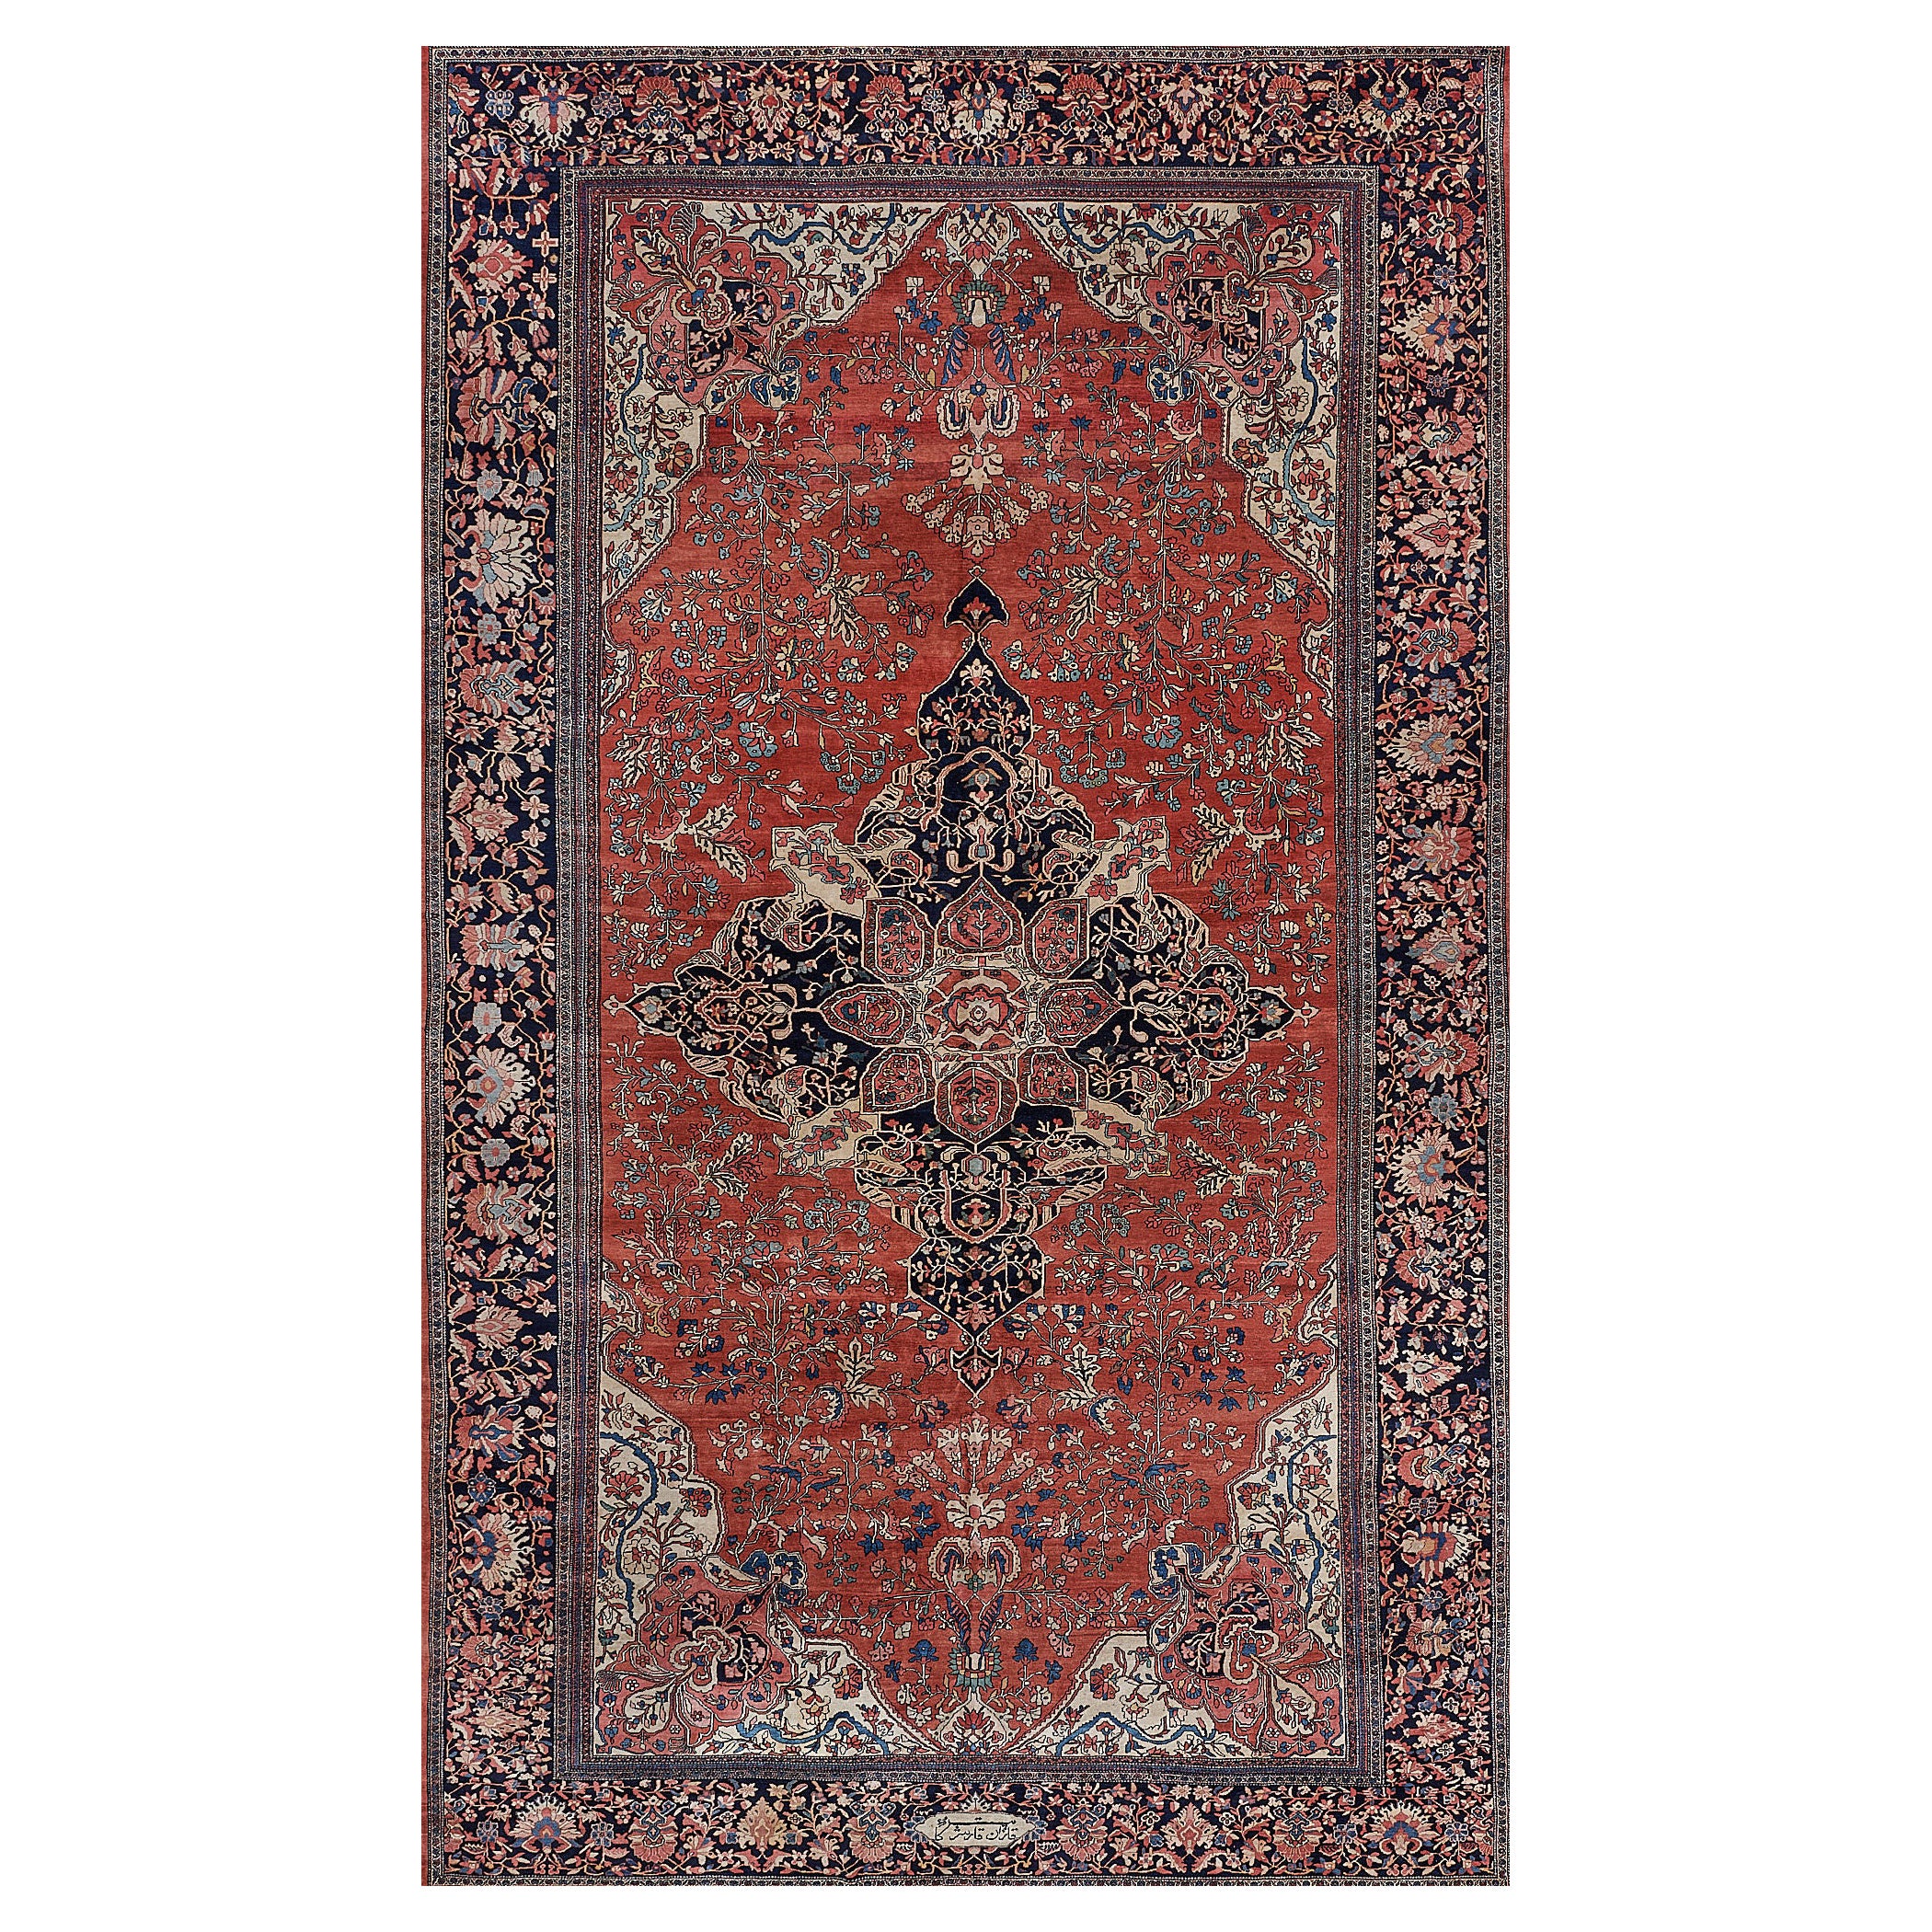 Antique Handwoven Persian Faraghan Rug in Perfect Condition For Sale